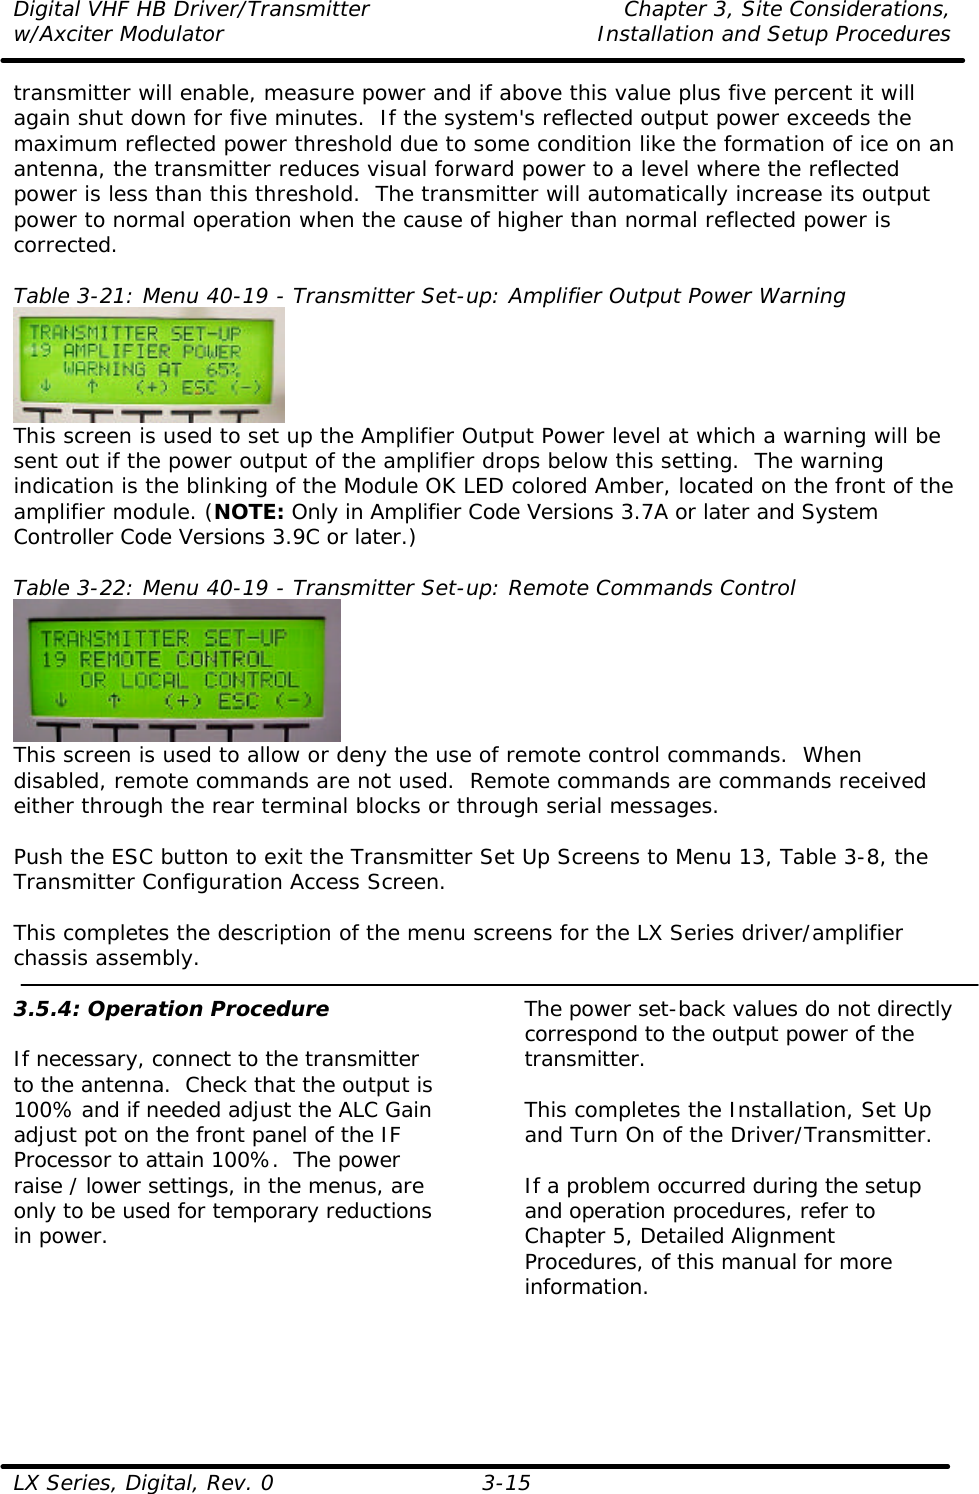 Digital VHF HB Driver/Transmitter Chapter 3, Site Considerations,  w/Axciter Modulator Installation and Setup Procedures  LX Series, Digital, Rev. 0 3-15 transmitter will enable, measure power and if above this value plus five percent it will again shut down for five minutes.  If the system&apos;s reflected output power exceeds the maximum reflected power threshold due to some condition like the formation of ice on an antenna, the transmitter reduces visual forward power to a level where the reflected power is less than this threshold.  The transmitter will automatically increase its output power to normal operation when the cause of higher than normal reflected power is corrected.  Table 3-21: Menu 40-19 - Transmitter Set-up: Amplifier Output Power Warning  This screen is used to set up the Amplifier Output Power level at which a warning will be sent out if the power output of the amplifier drops below this setting.  The warning indication is the blinking of the Module OK LED colored Amber, located on the front of the amplifier module. (NOTE: Only in Amplifier Code Versions 3.7A or later and System Controller Code Versions 3.9C or later.)  Table 3-22: Menu 40-19 - Transmitter Set-up: Remote Commands Control  This screen is used to allow or deny the use of remote control commands.  When disabled, remote commands are not used.  Remote commands are commands received either through the rear terminal blocks or through serial messages.  Push the ESC button to exit the Transmitter Set Up Screens to Menu 13, Table 3-8, the Transmitter Configuration Access Screen.  This completes the description of the menu screens for the LX Series driver/amplifier chassis assembly.  3.5.4: Operation Procedure  If necessary, connect to the transmitter to the antenna.  Check that the output is 100% and if needed adjust the ALC Gain adjust pot on the front panel of the IF Processor to attain 100%.  The power raise / lower settings, in the menus, are only to be used for temporary reductions in power.  The power set-back values do not directly correspond to the output power of the transmitter.  This completes the Installation, Set Up and Turn On of the Driver/Transmitter.  If a problem occurred during the setup and operation procedures, refer to Chapter 5, Detailed Alignment Procedures, of this manual for more information.   